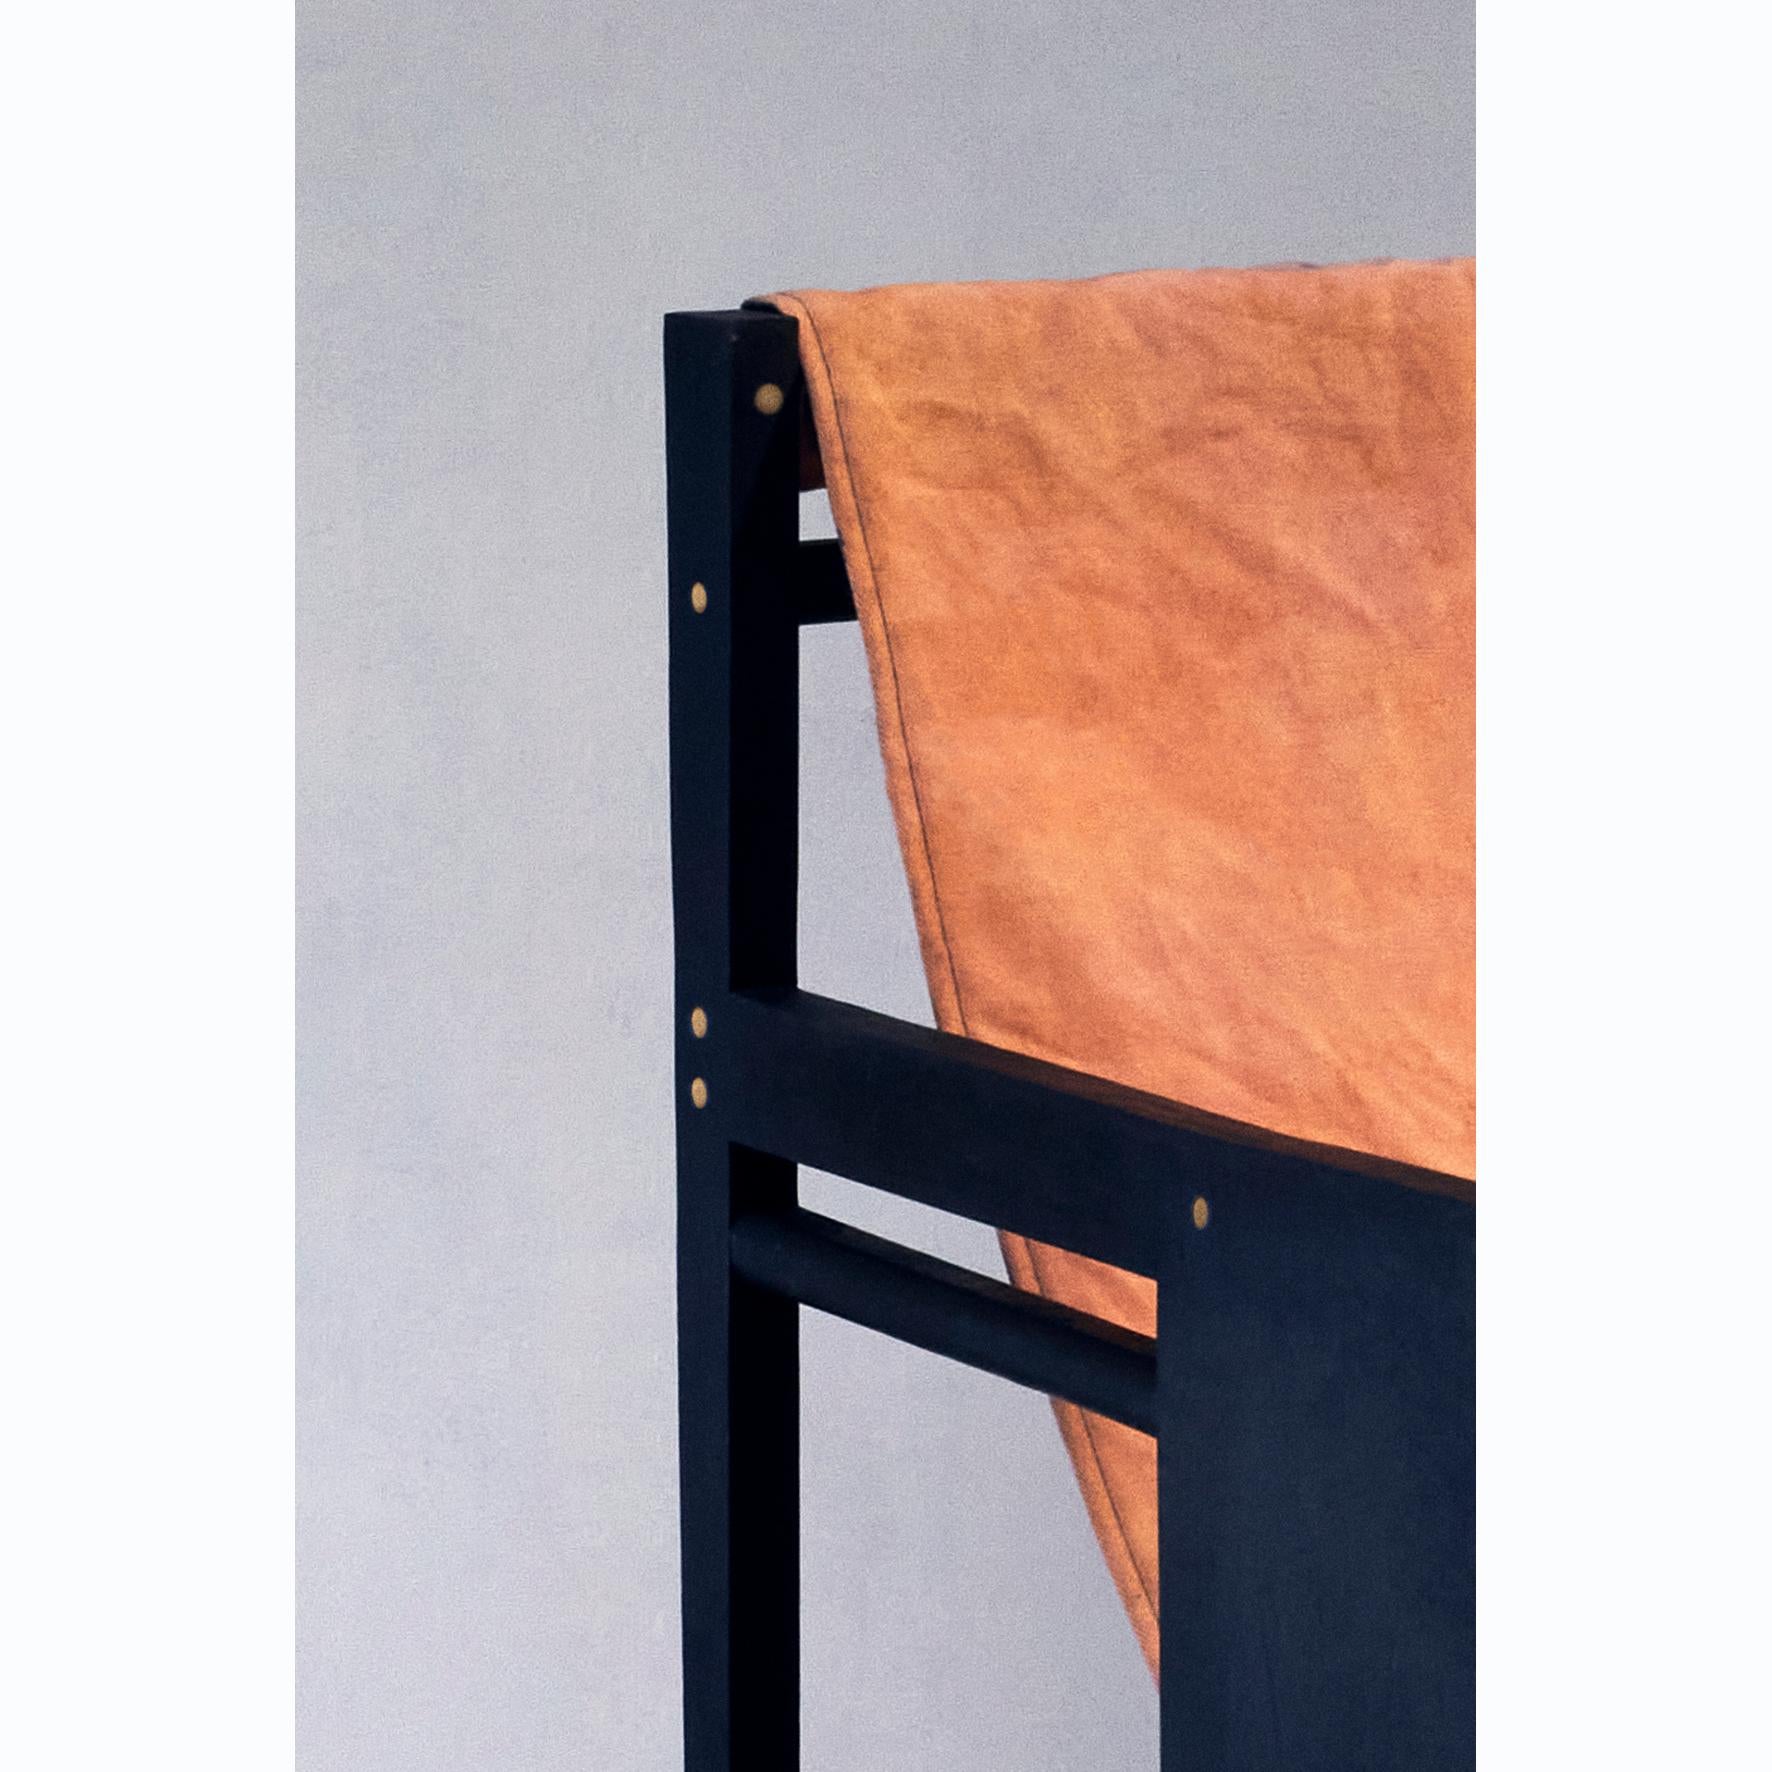 French Matang Chair, a Dyed Wood and Cotton Armchair, by Matang and Natasha Sumant For Sale